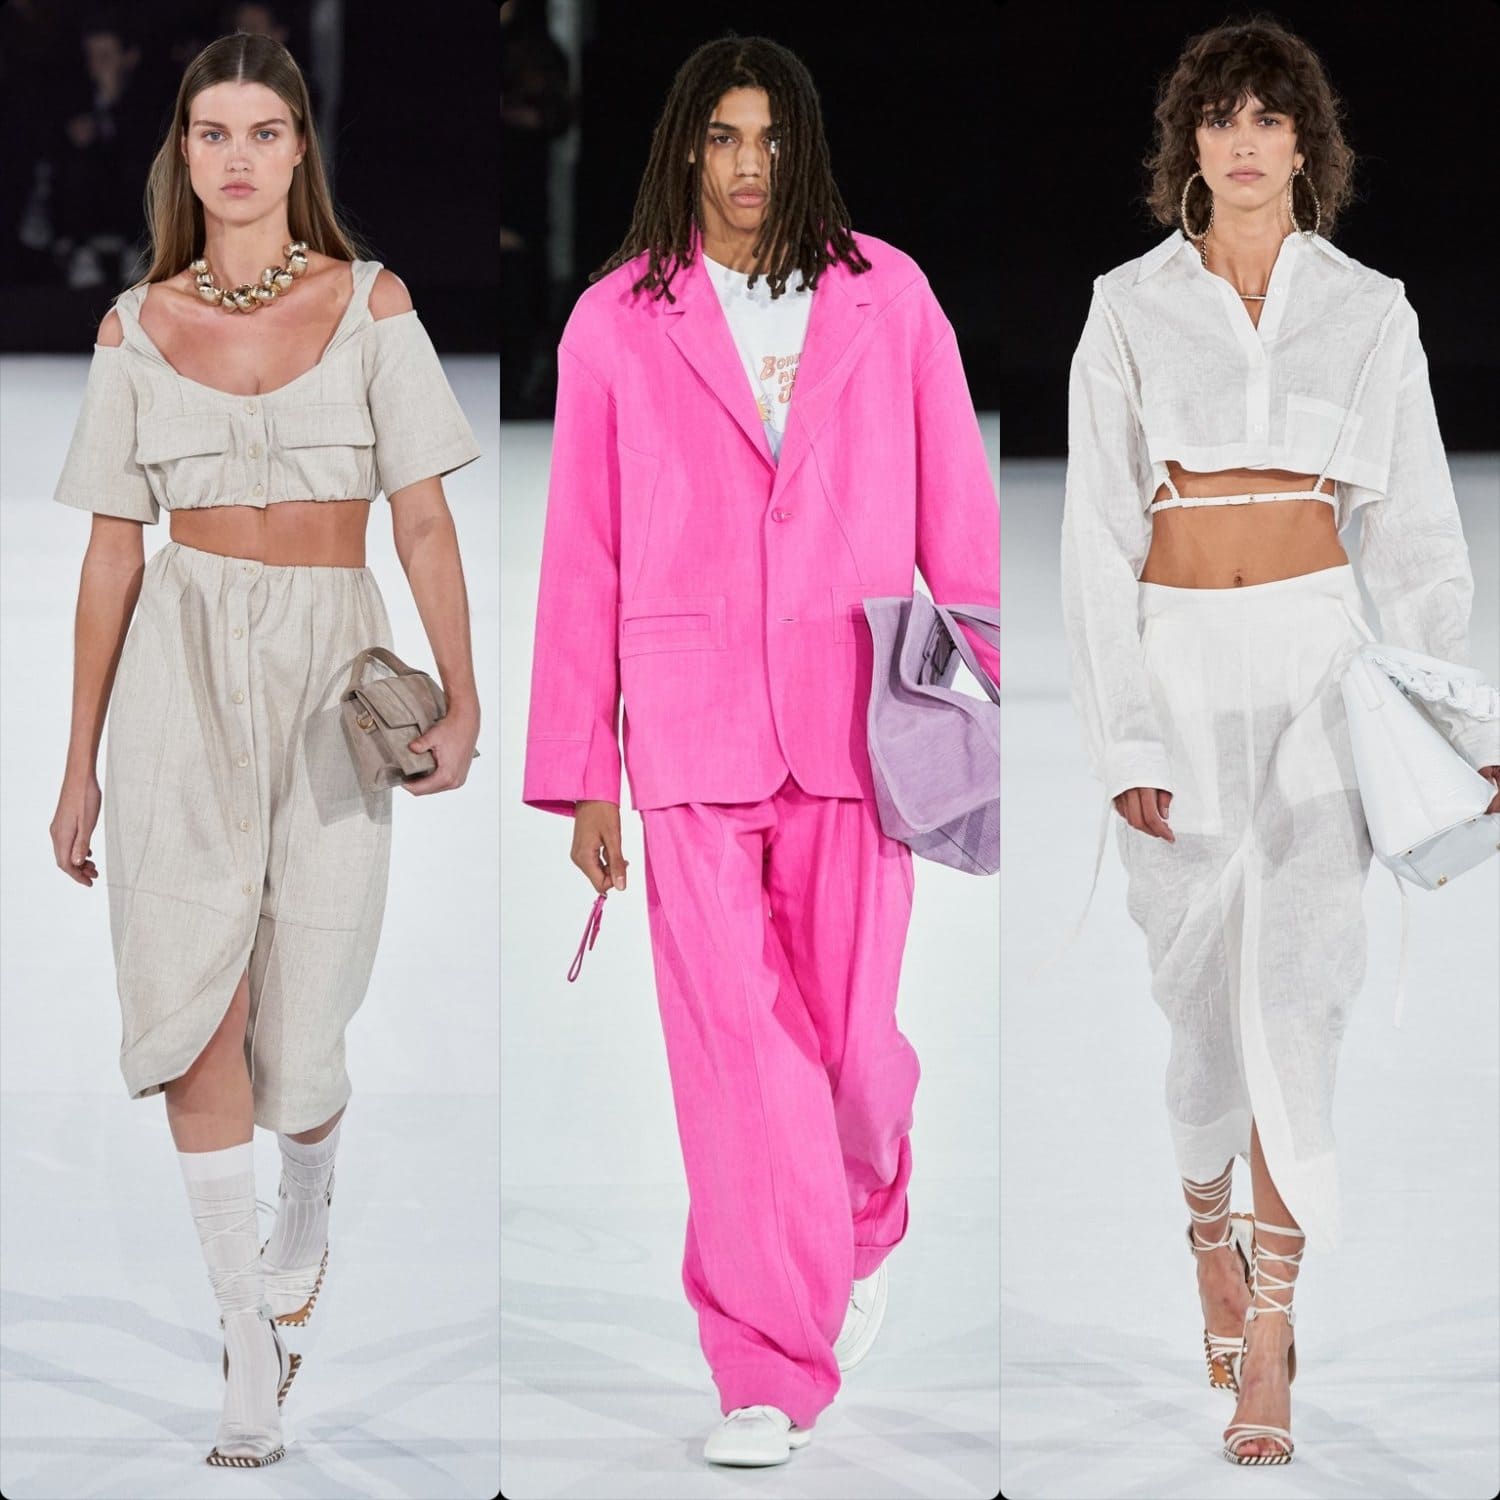 Jacquemus Fall/Winter 2020 Runway Show Is Going Viral